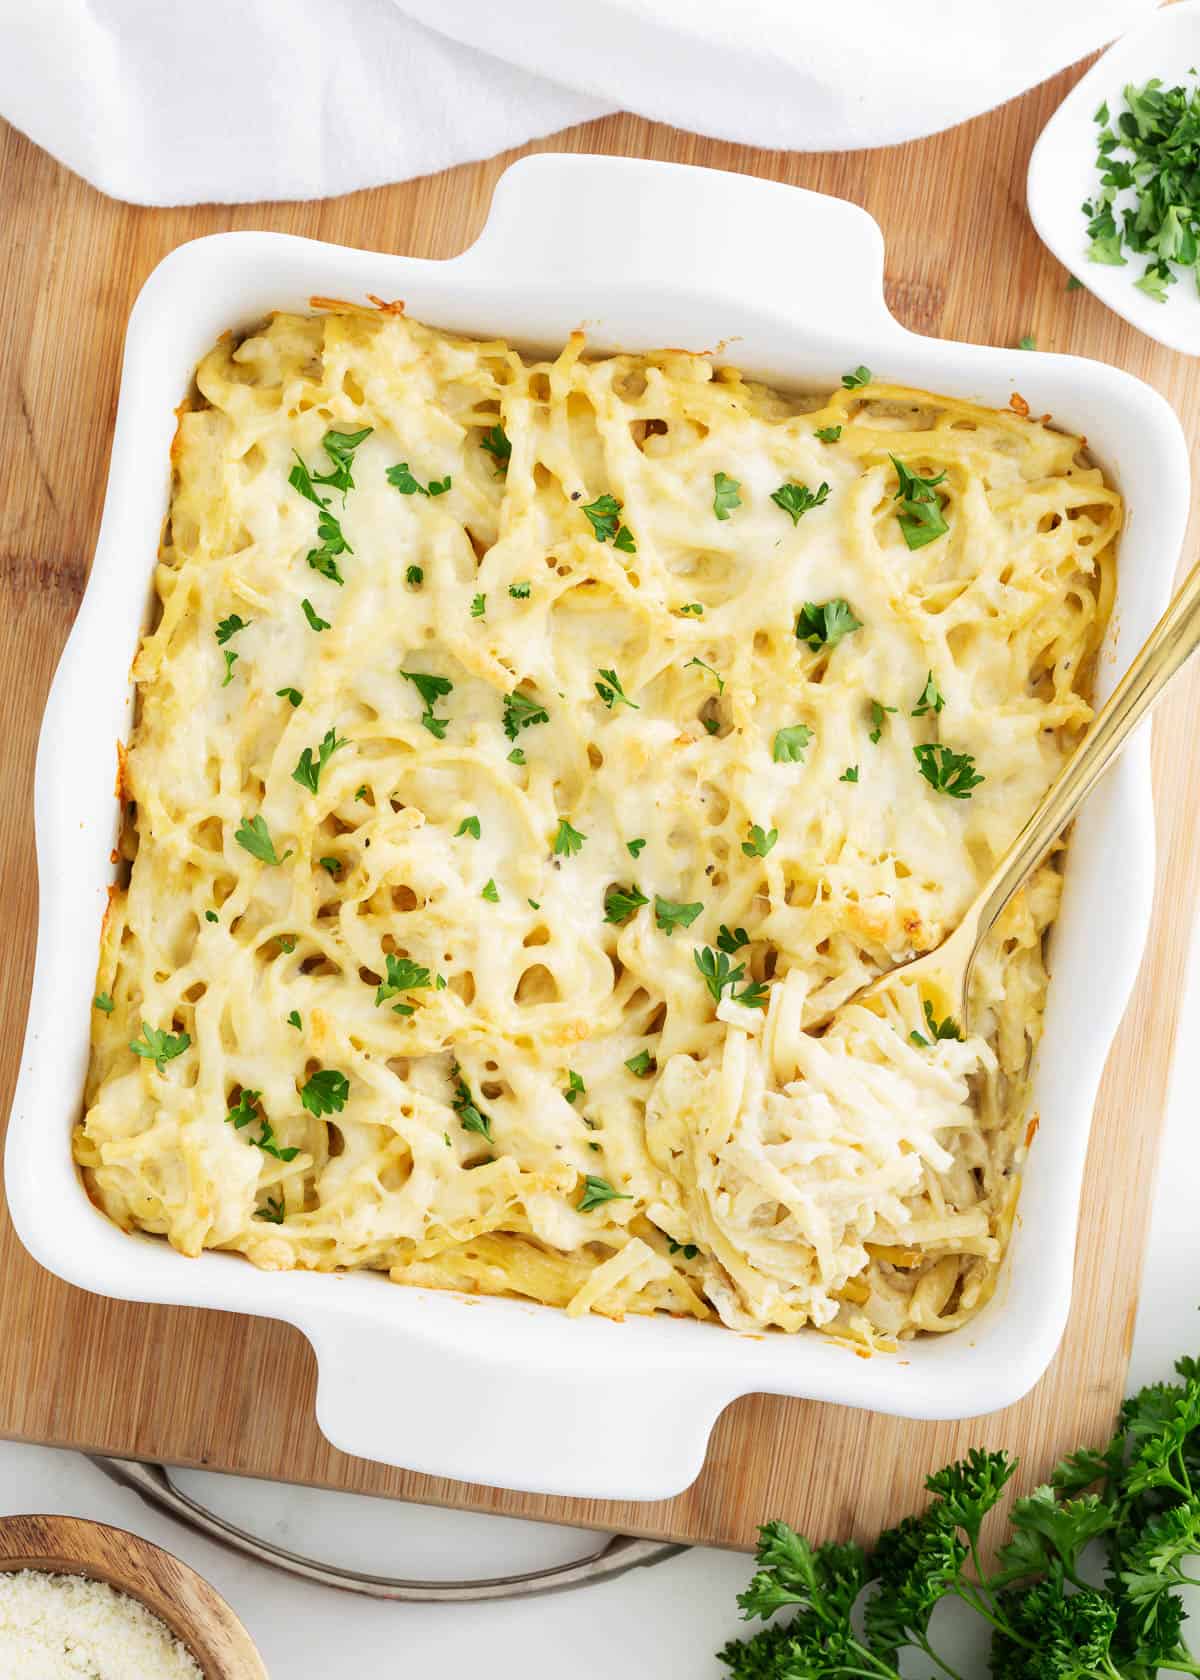 Chicken tetrazzini baked in a white dish.